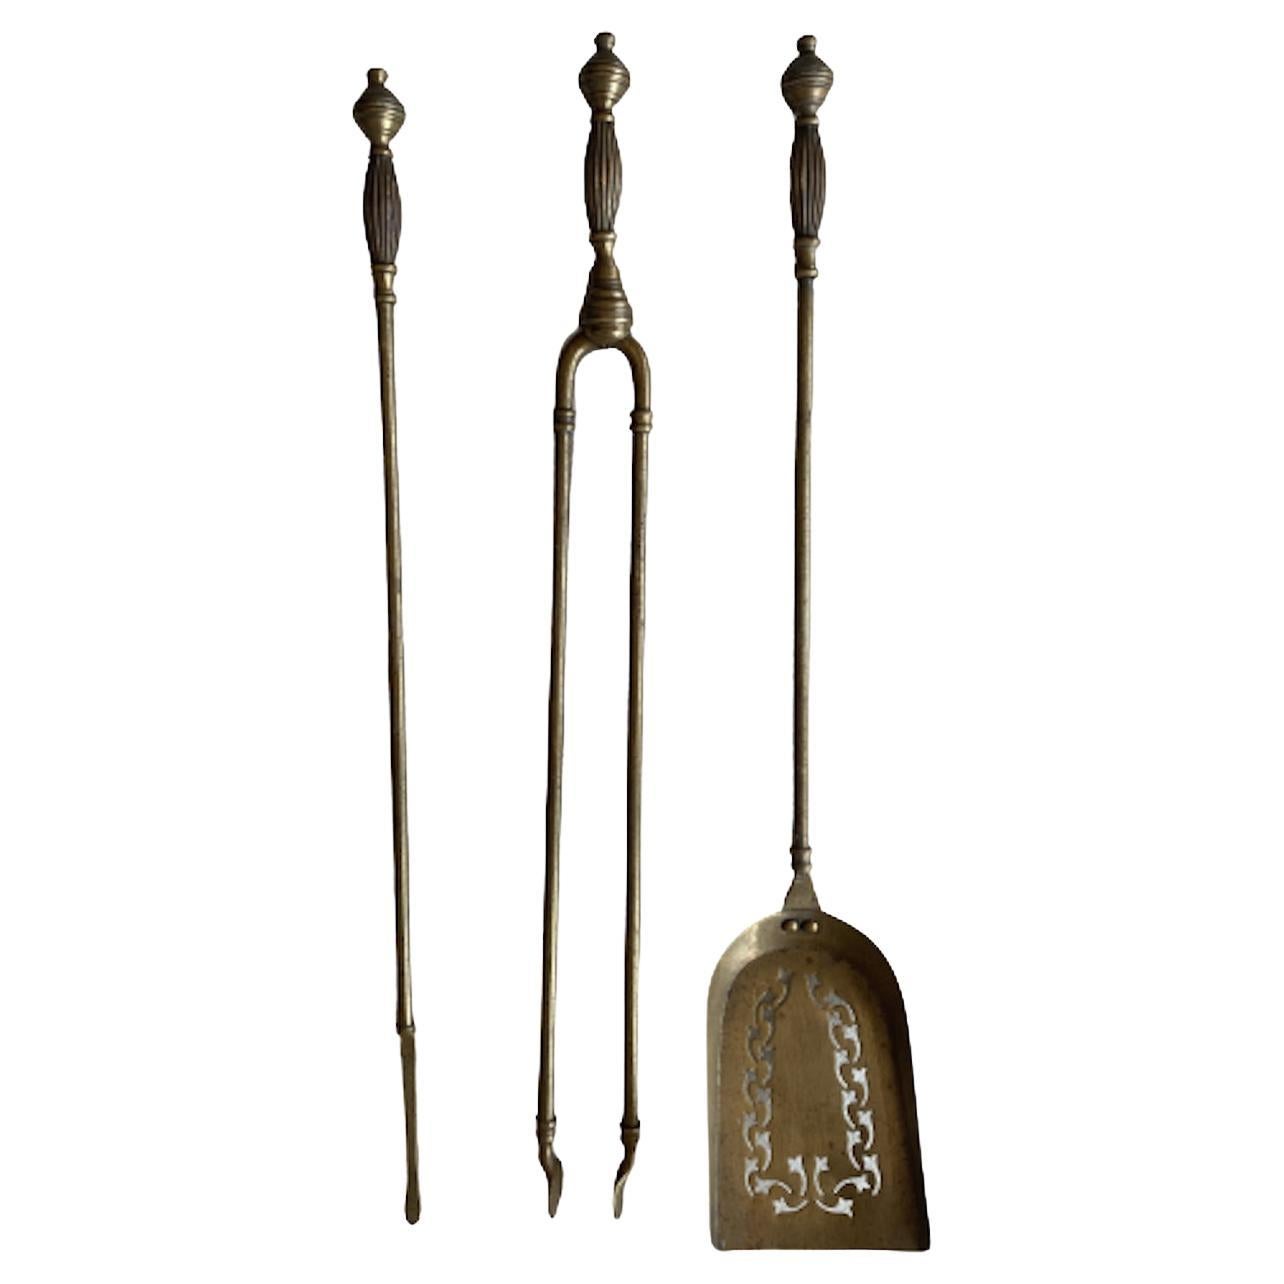 A stunning antique Victorian Gothic brass fire companion set. The superb set is solid brass, with beautiful motifs and design. The spade is engraved with floral design, matching the elegant yet powerful impression the set provides. This is truly a